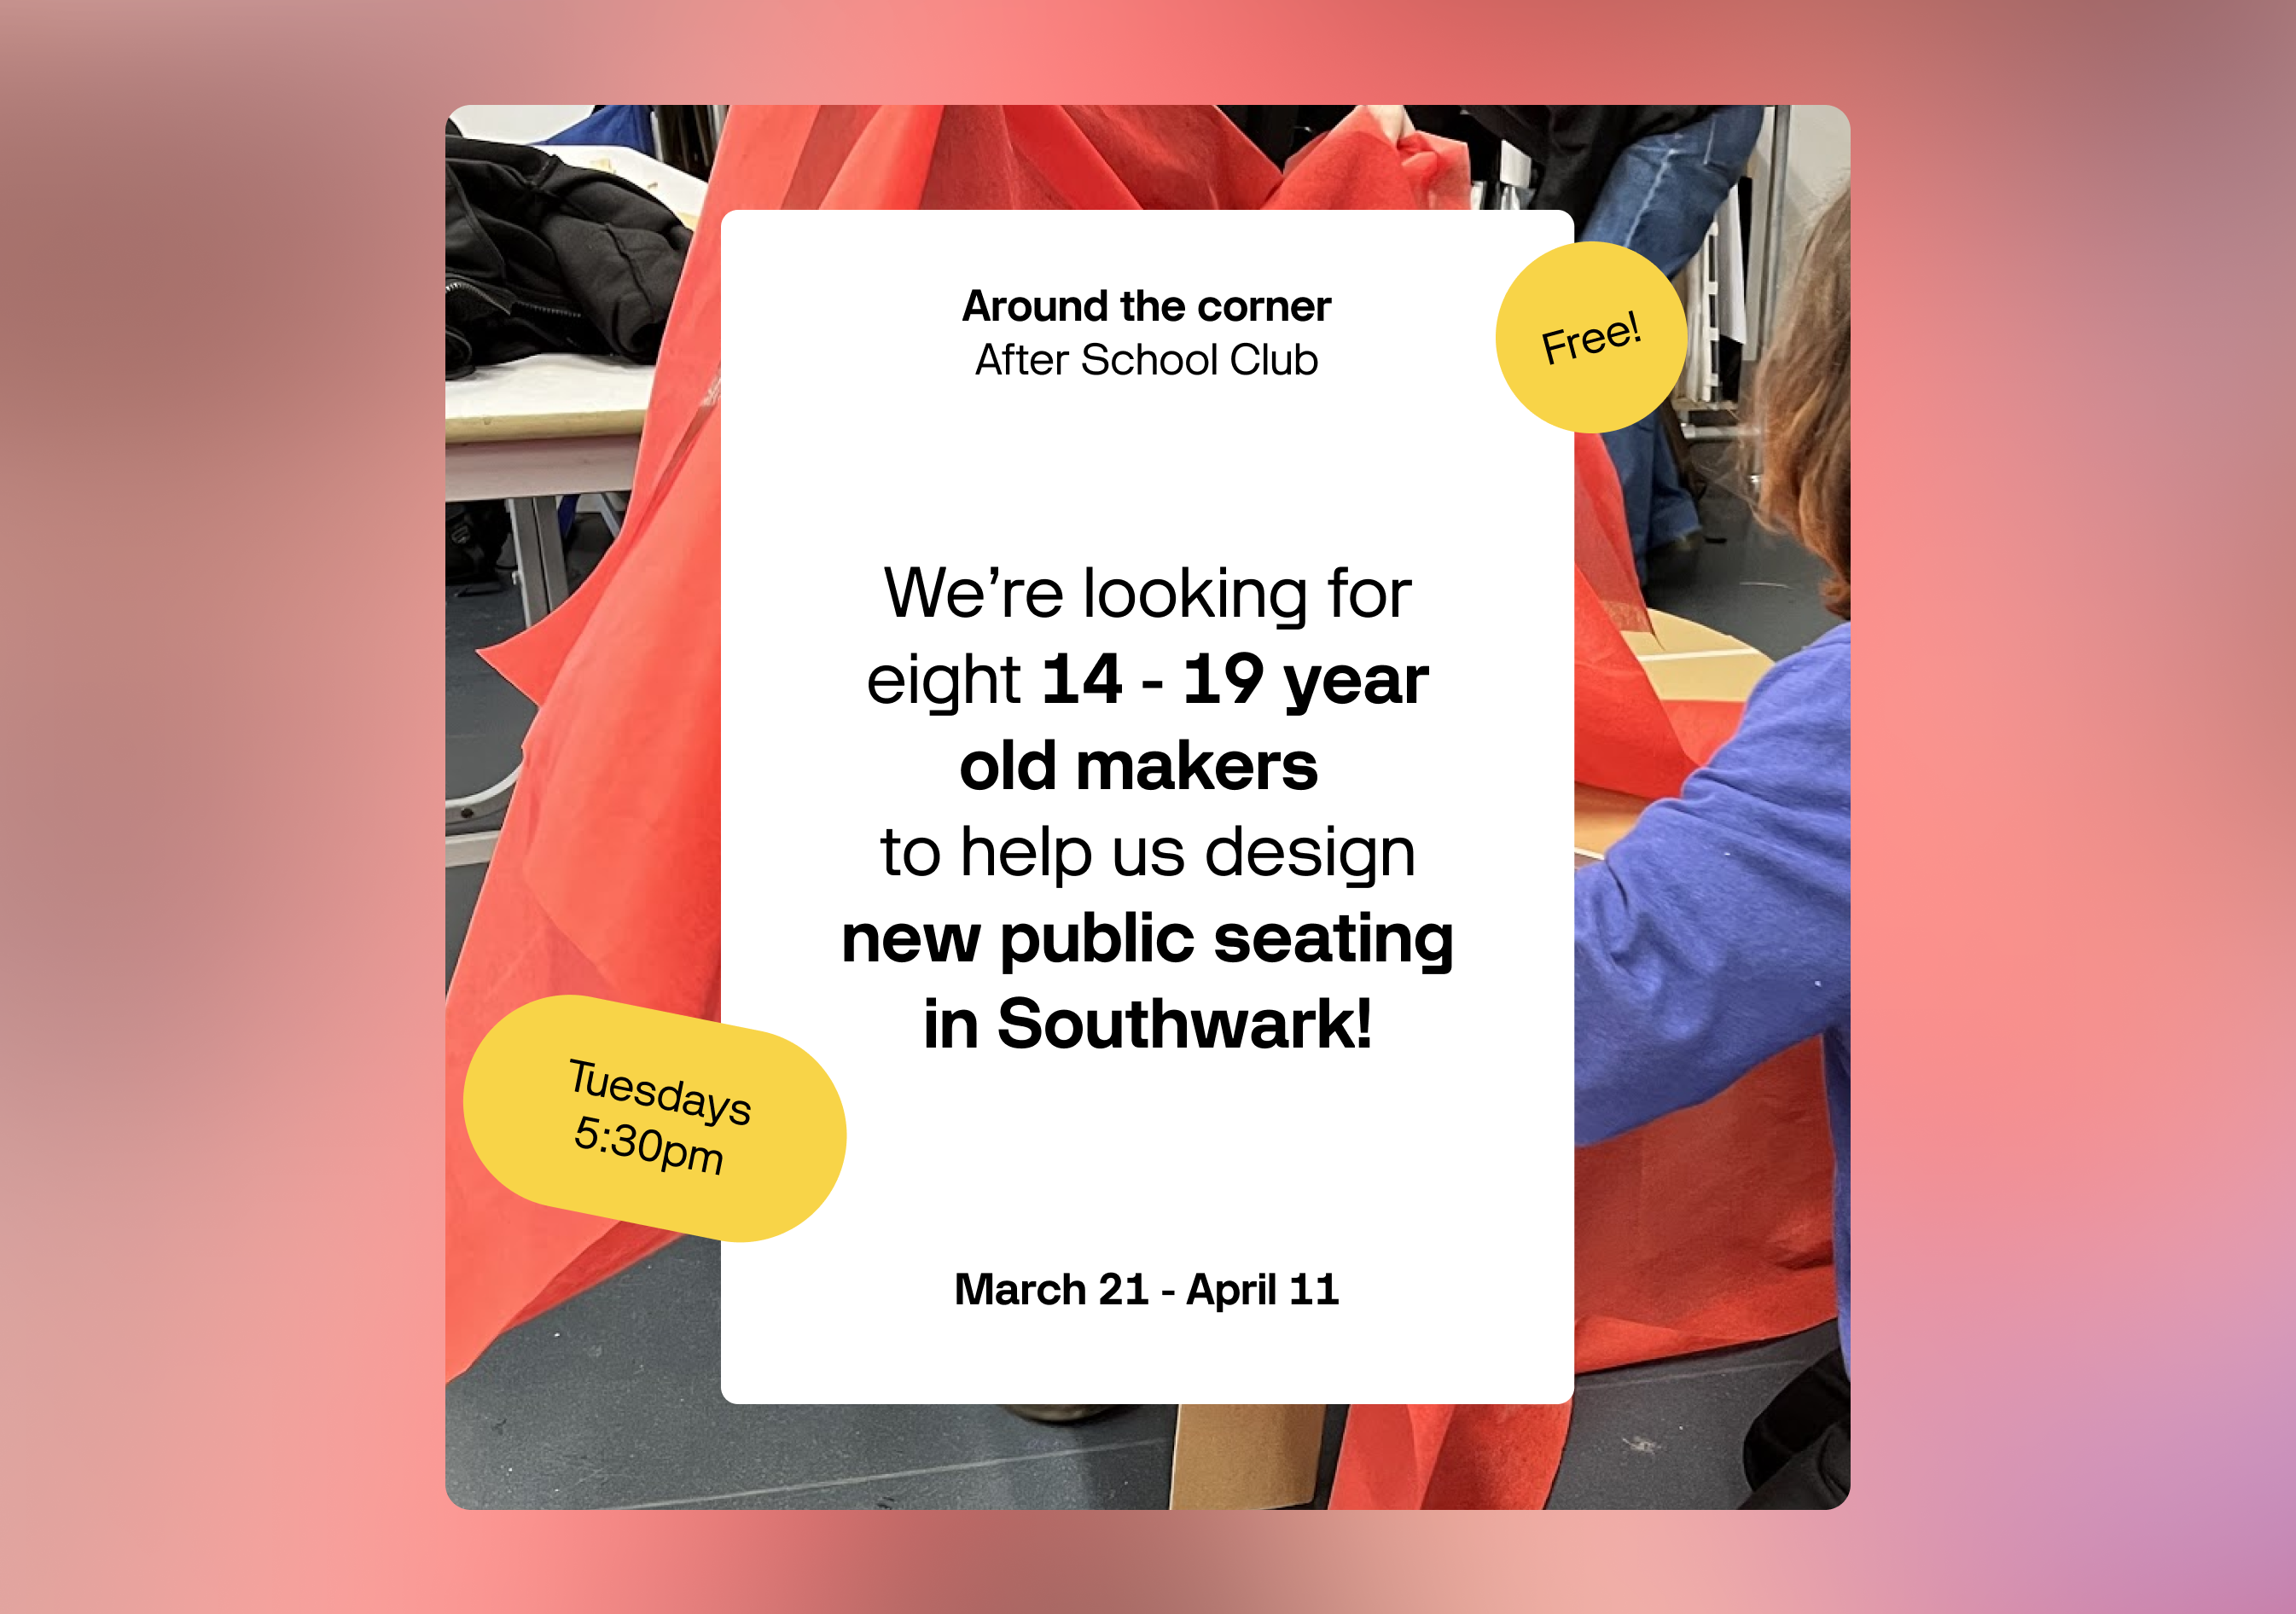 Advert for after school club - text reads We are looking for eight 14 - 19 year old makers to help us design new public seating in Southwark!